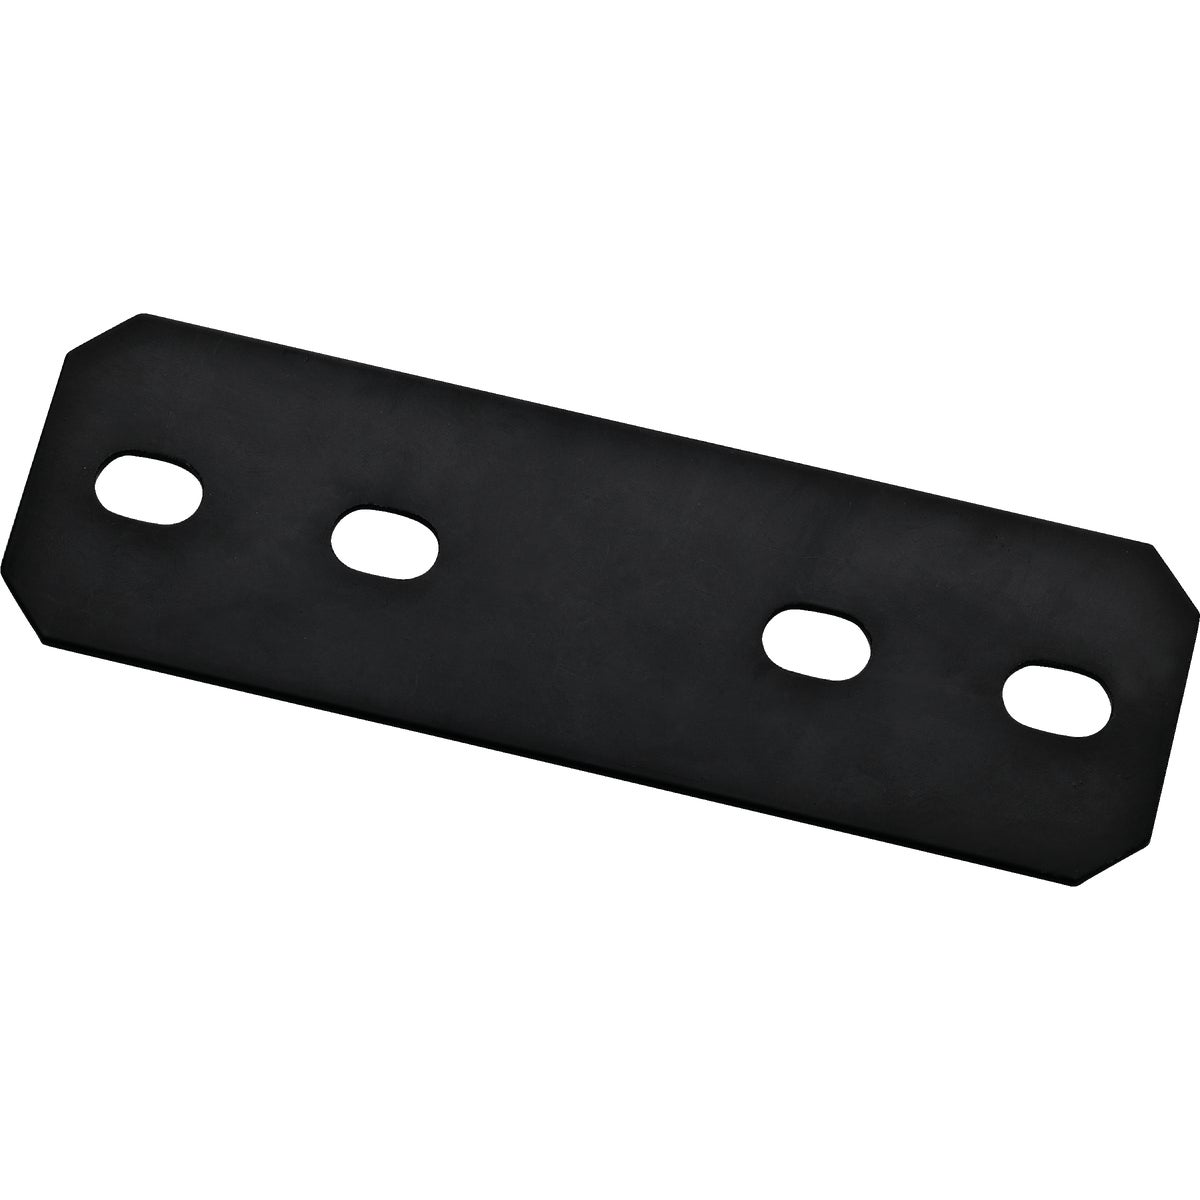 National Catalog 1183BC 9.5 In. x 3 In. Black Heavy Duty Mending Plate